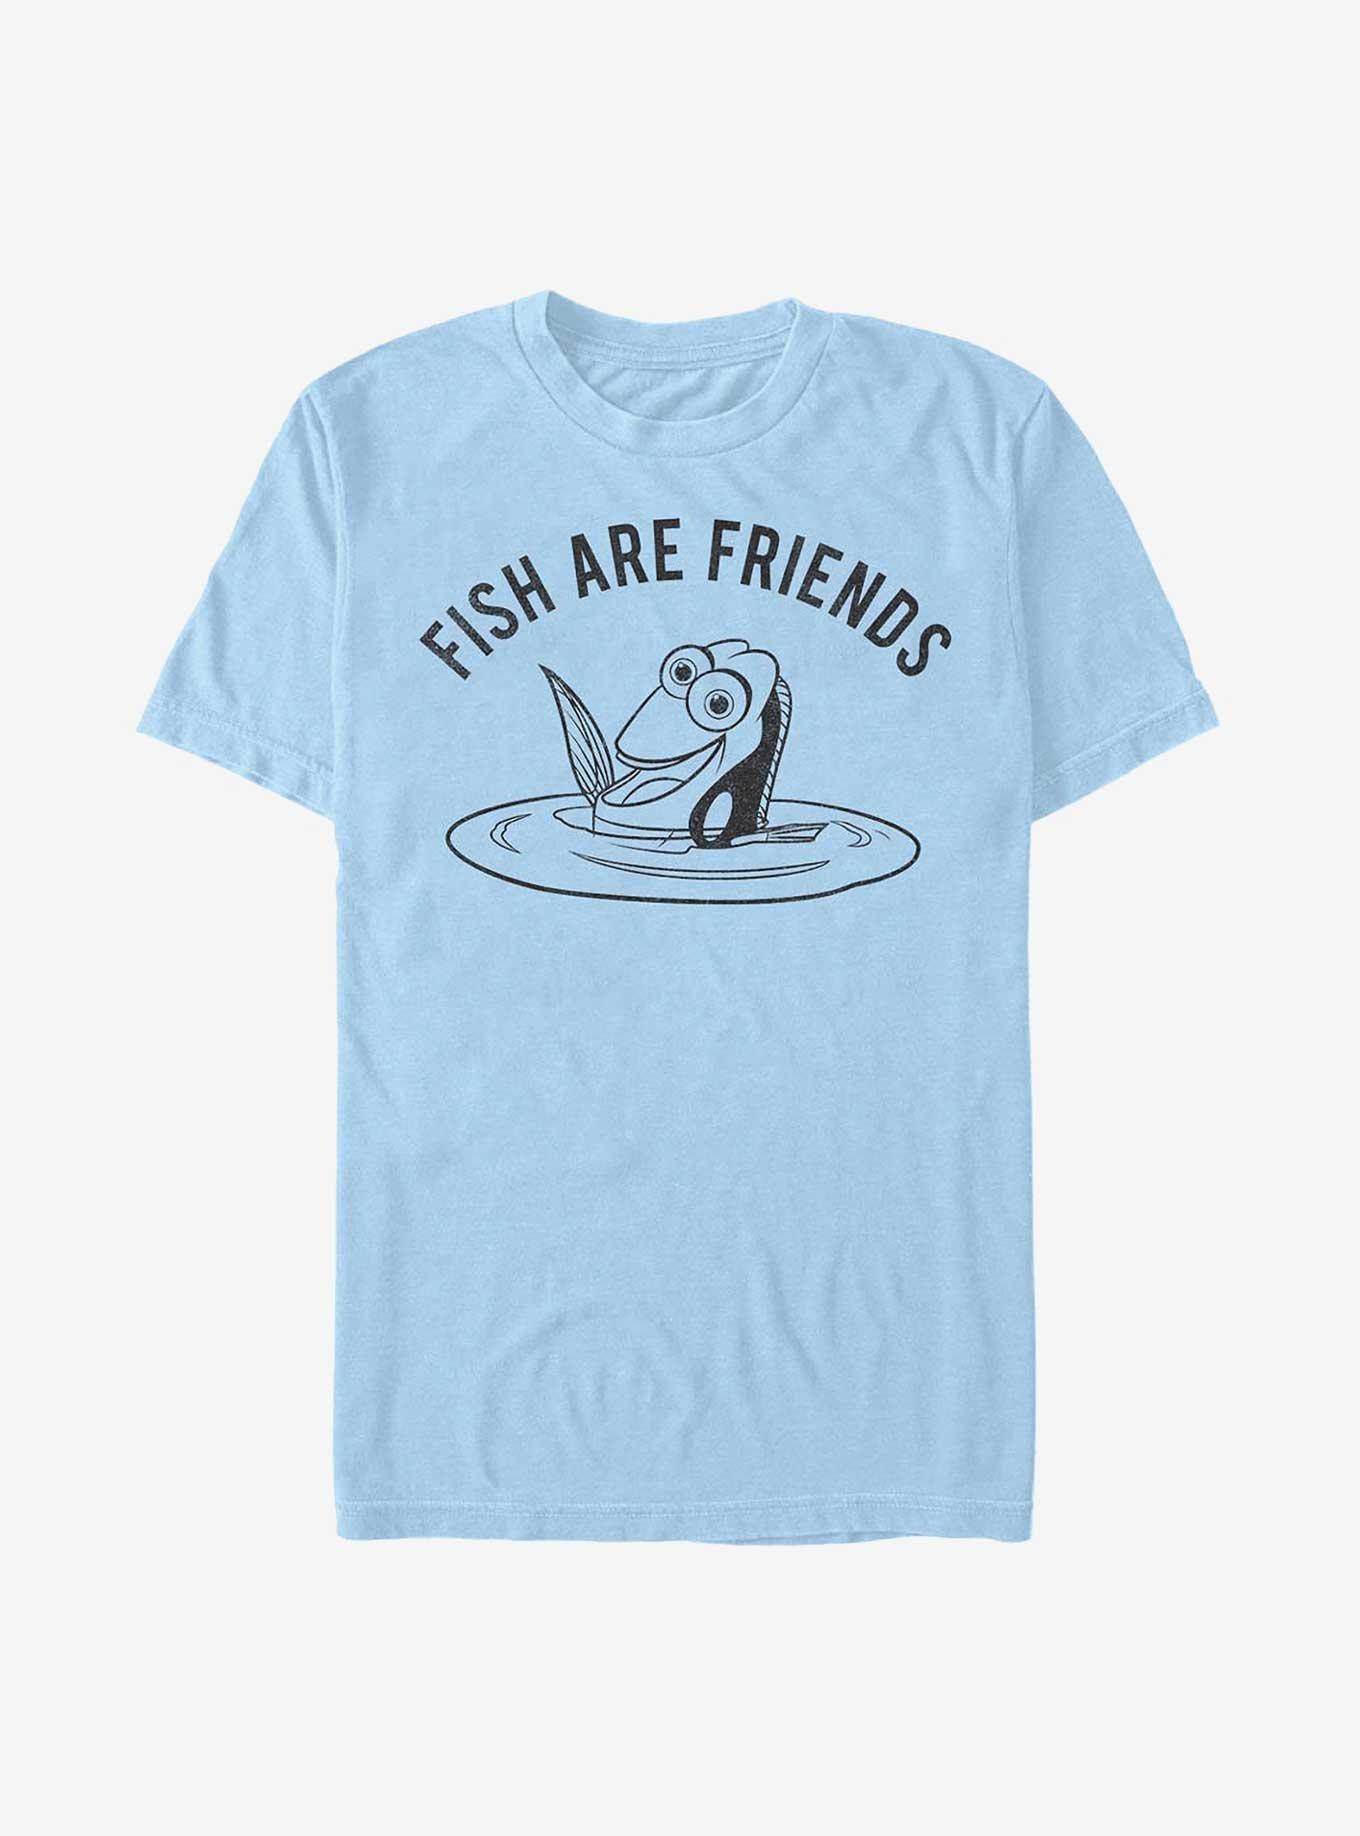 Disney Pixar Finding Nemo Earth Day Dory Fish Are Friends T-Shirt